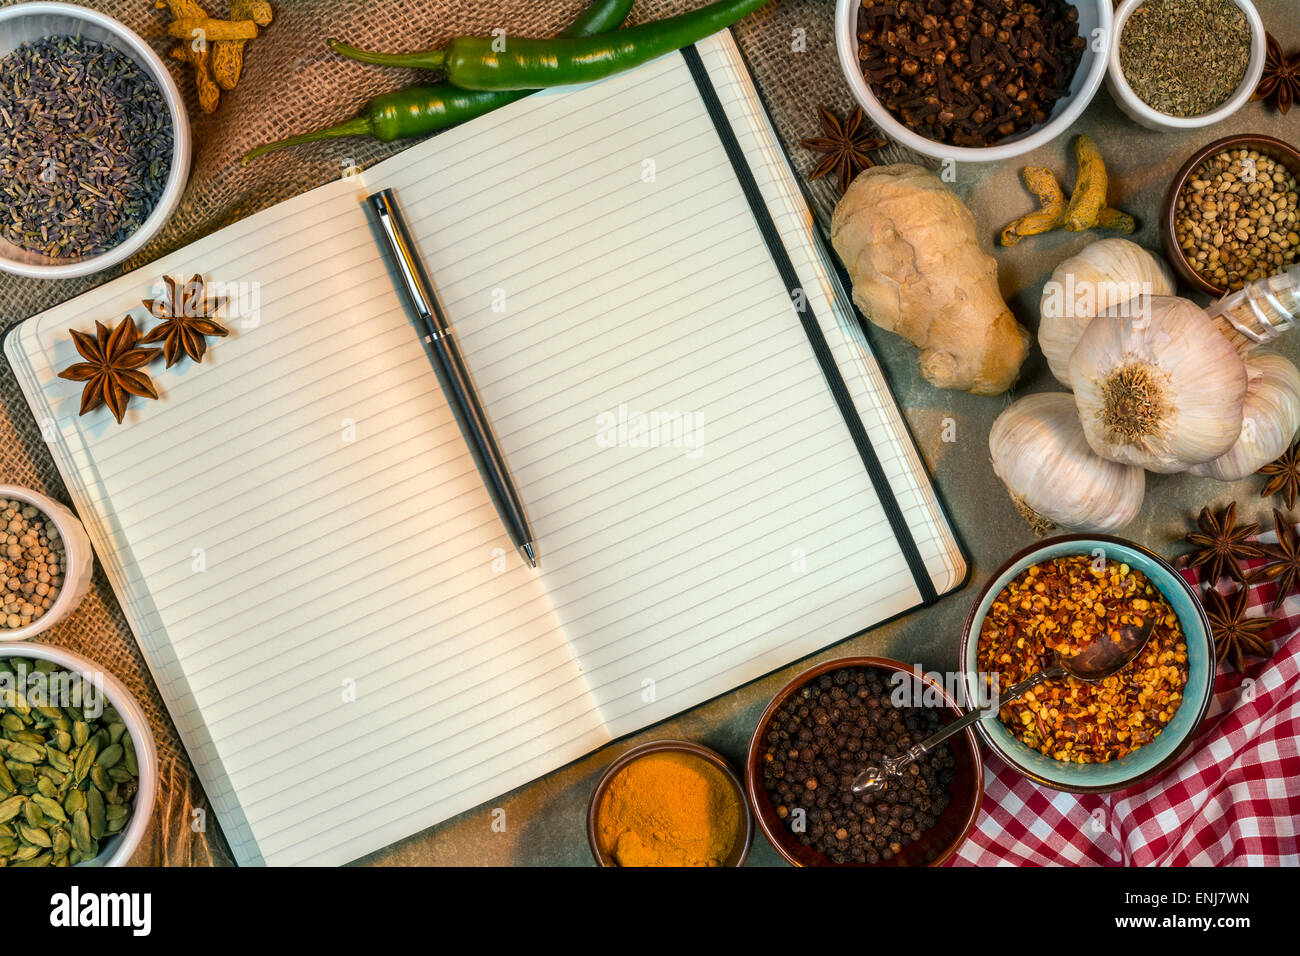 https://c8.alamy.com/comp/ENJ7WN/selection-of-cooking-spices-with-an-open-recipe-book-blank-pages-space-ENJ7WN.jpg